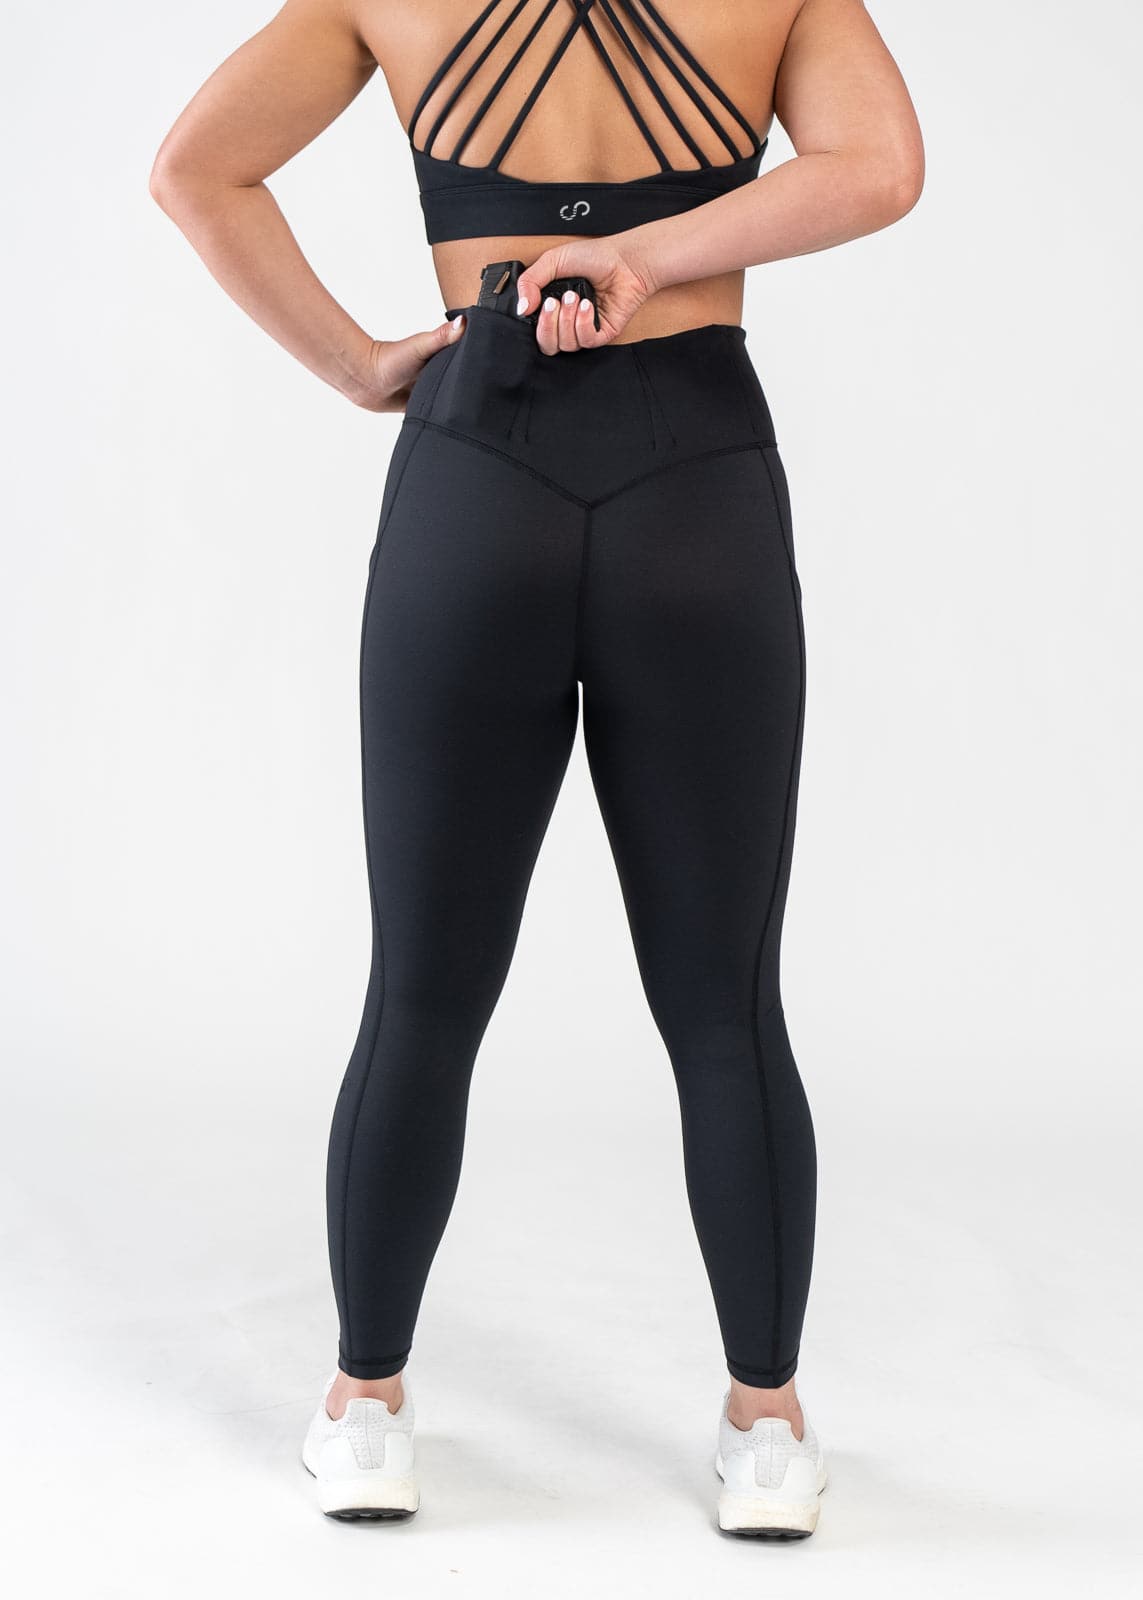 Concealed Carry Leggings With Pockets Shoulders Down Back View Reaching for Concealed Carry | Black